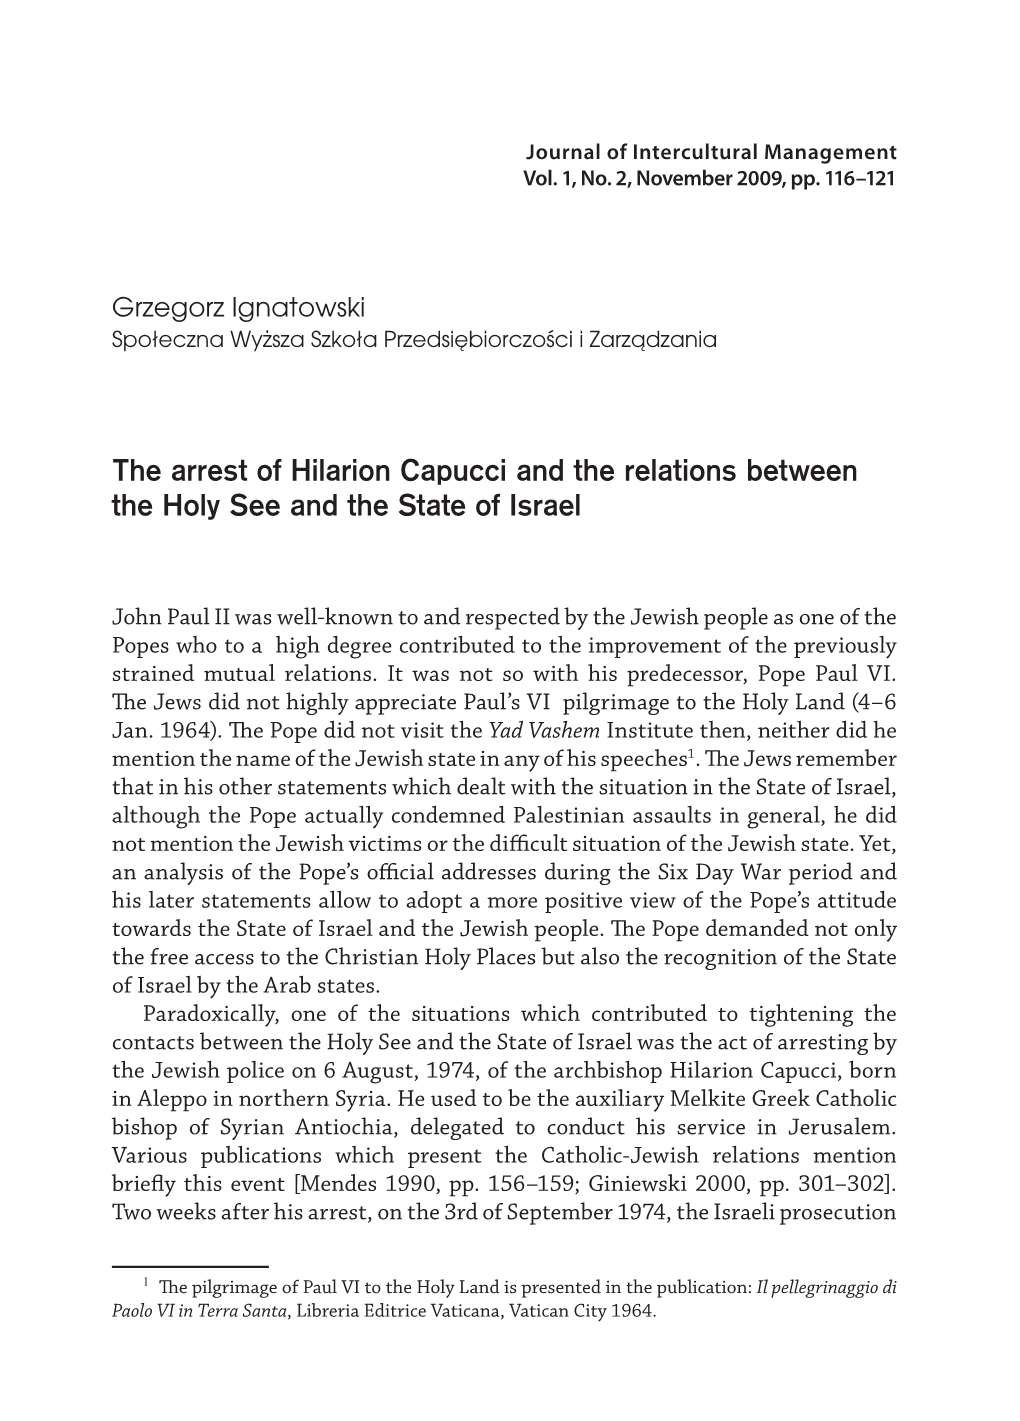 The Arrest of Hilarion Capucci and the Relations Between the Holy See and the State of Israel